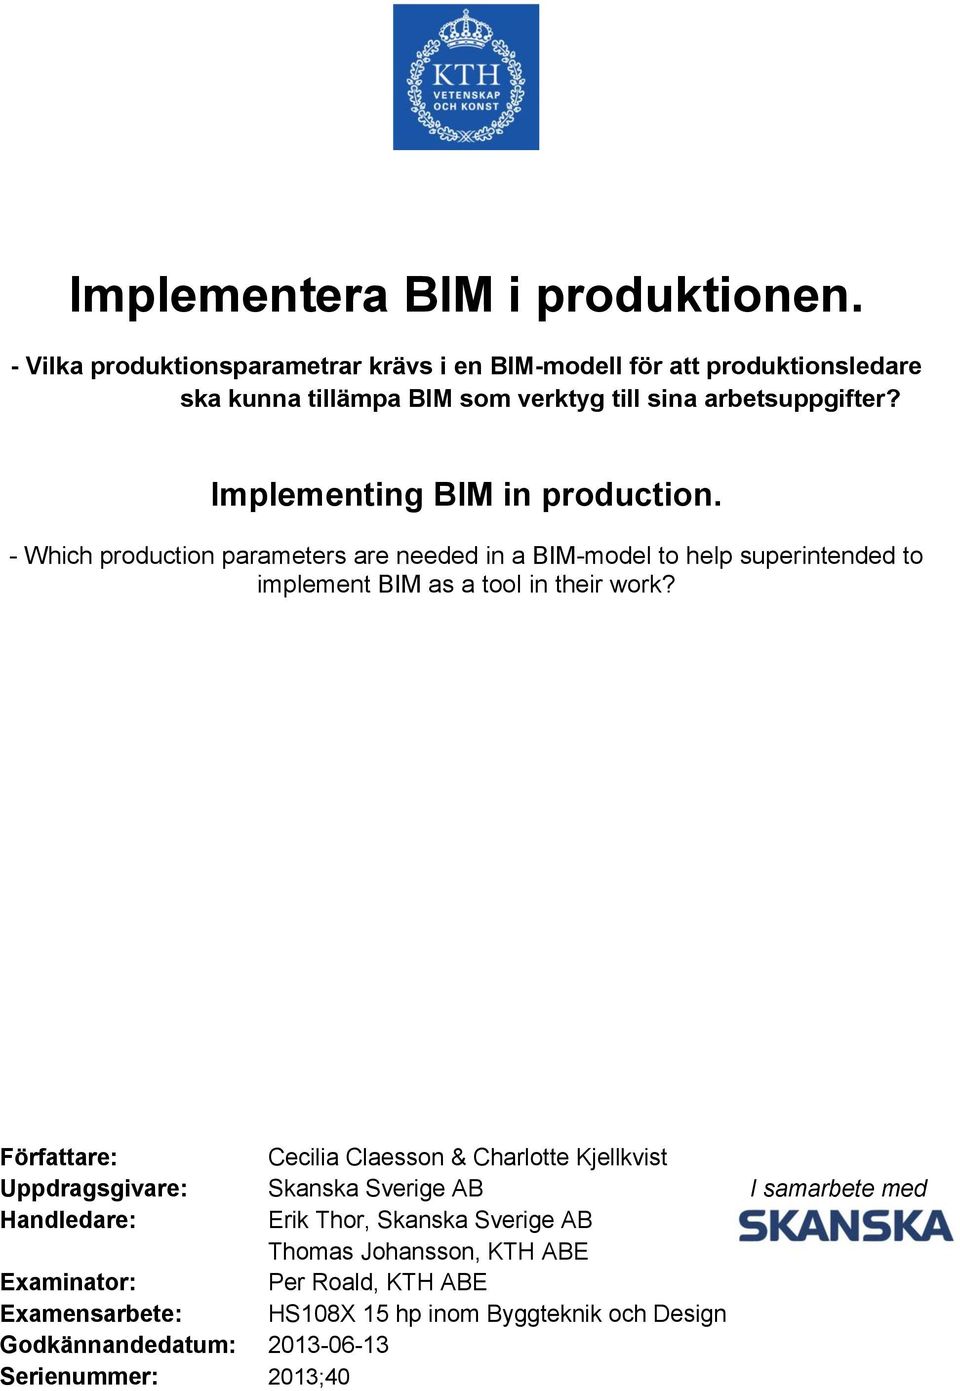 - Which production parameters are needed in a BIM-model to help superintended to implement BIM as a tool in their work?